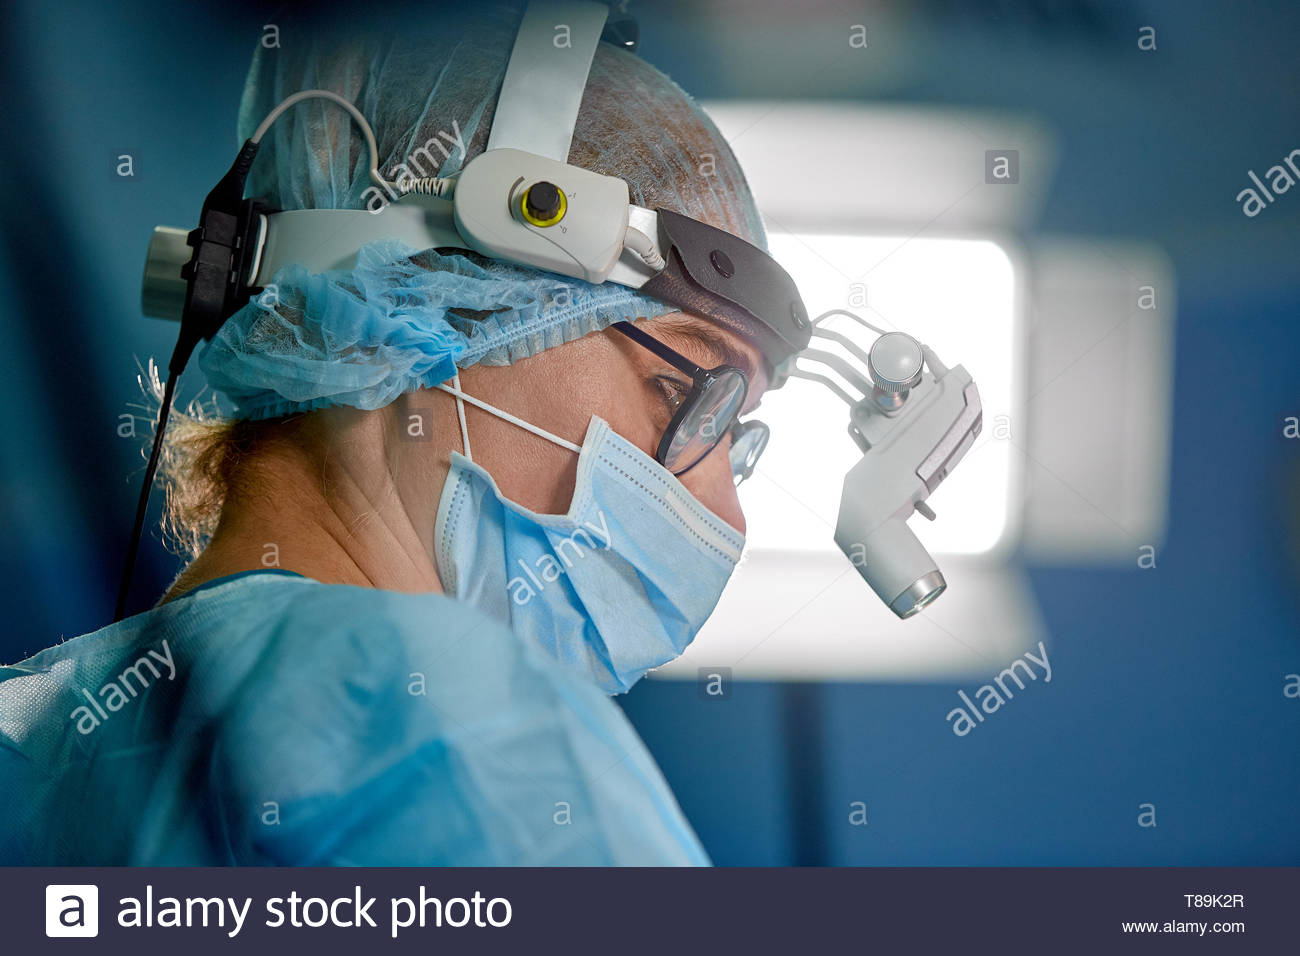 Health Care Medical Background Surgery Concept Portrait Of A